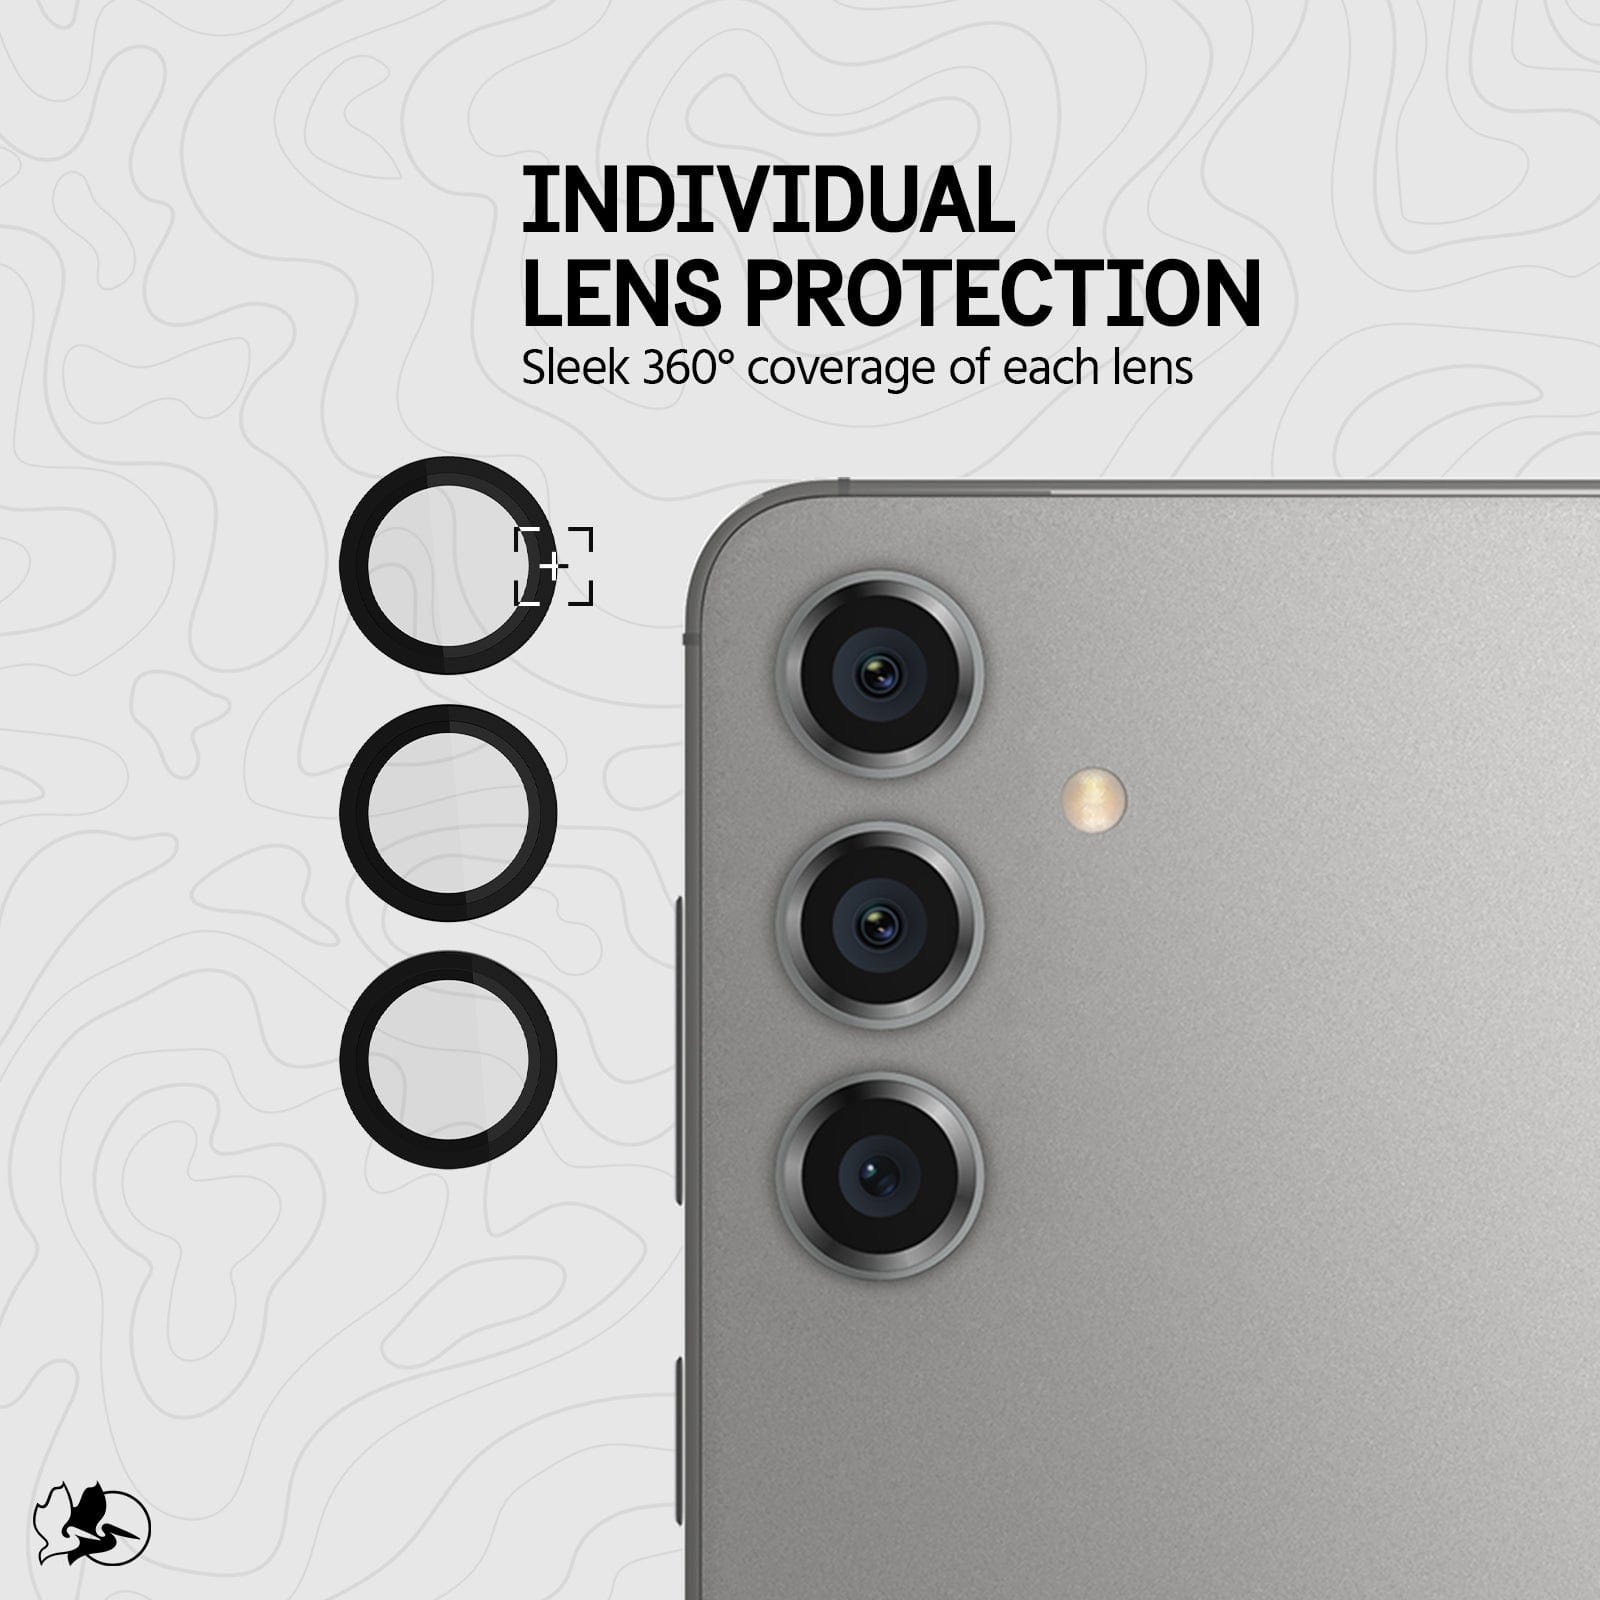 INDIVIDUAL LENS PROTECTION SLEEK 360 DEGREE COVERAGE OF EACH LENS